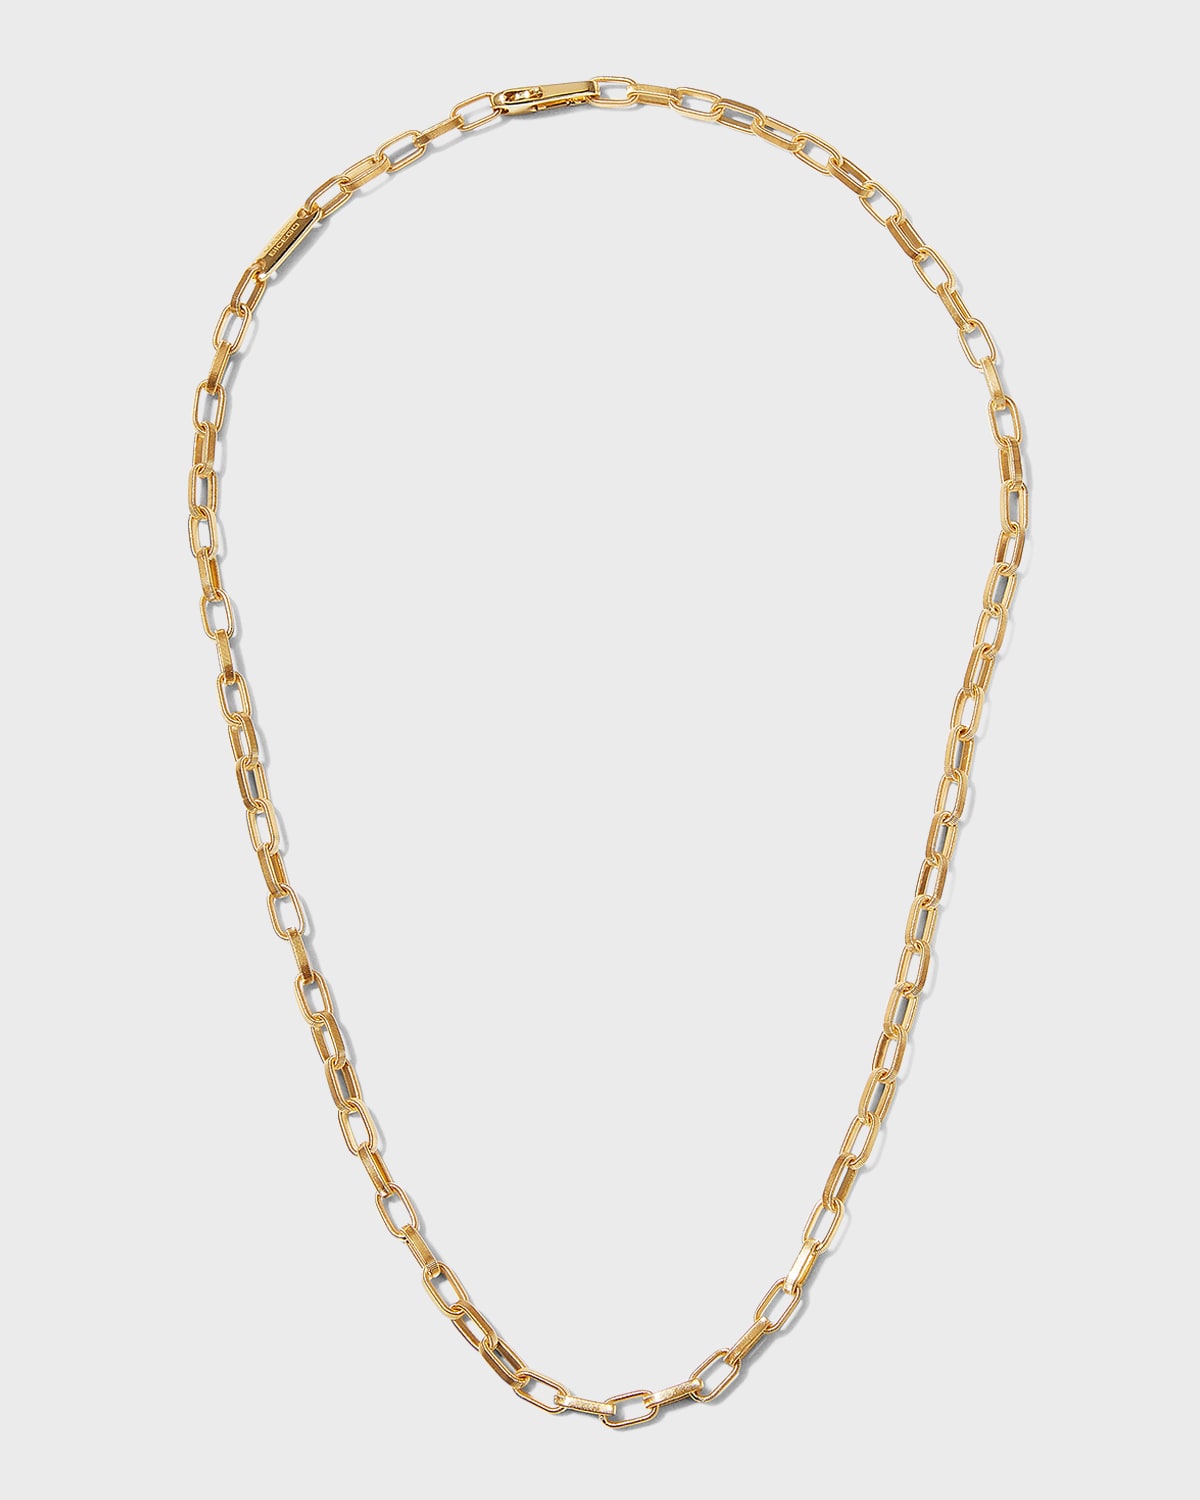 Marco Bicego 18k Unisex Uomo Coiled Open Chain Link Necklace